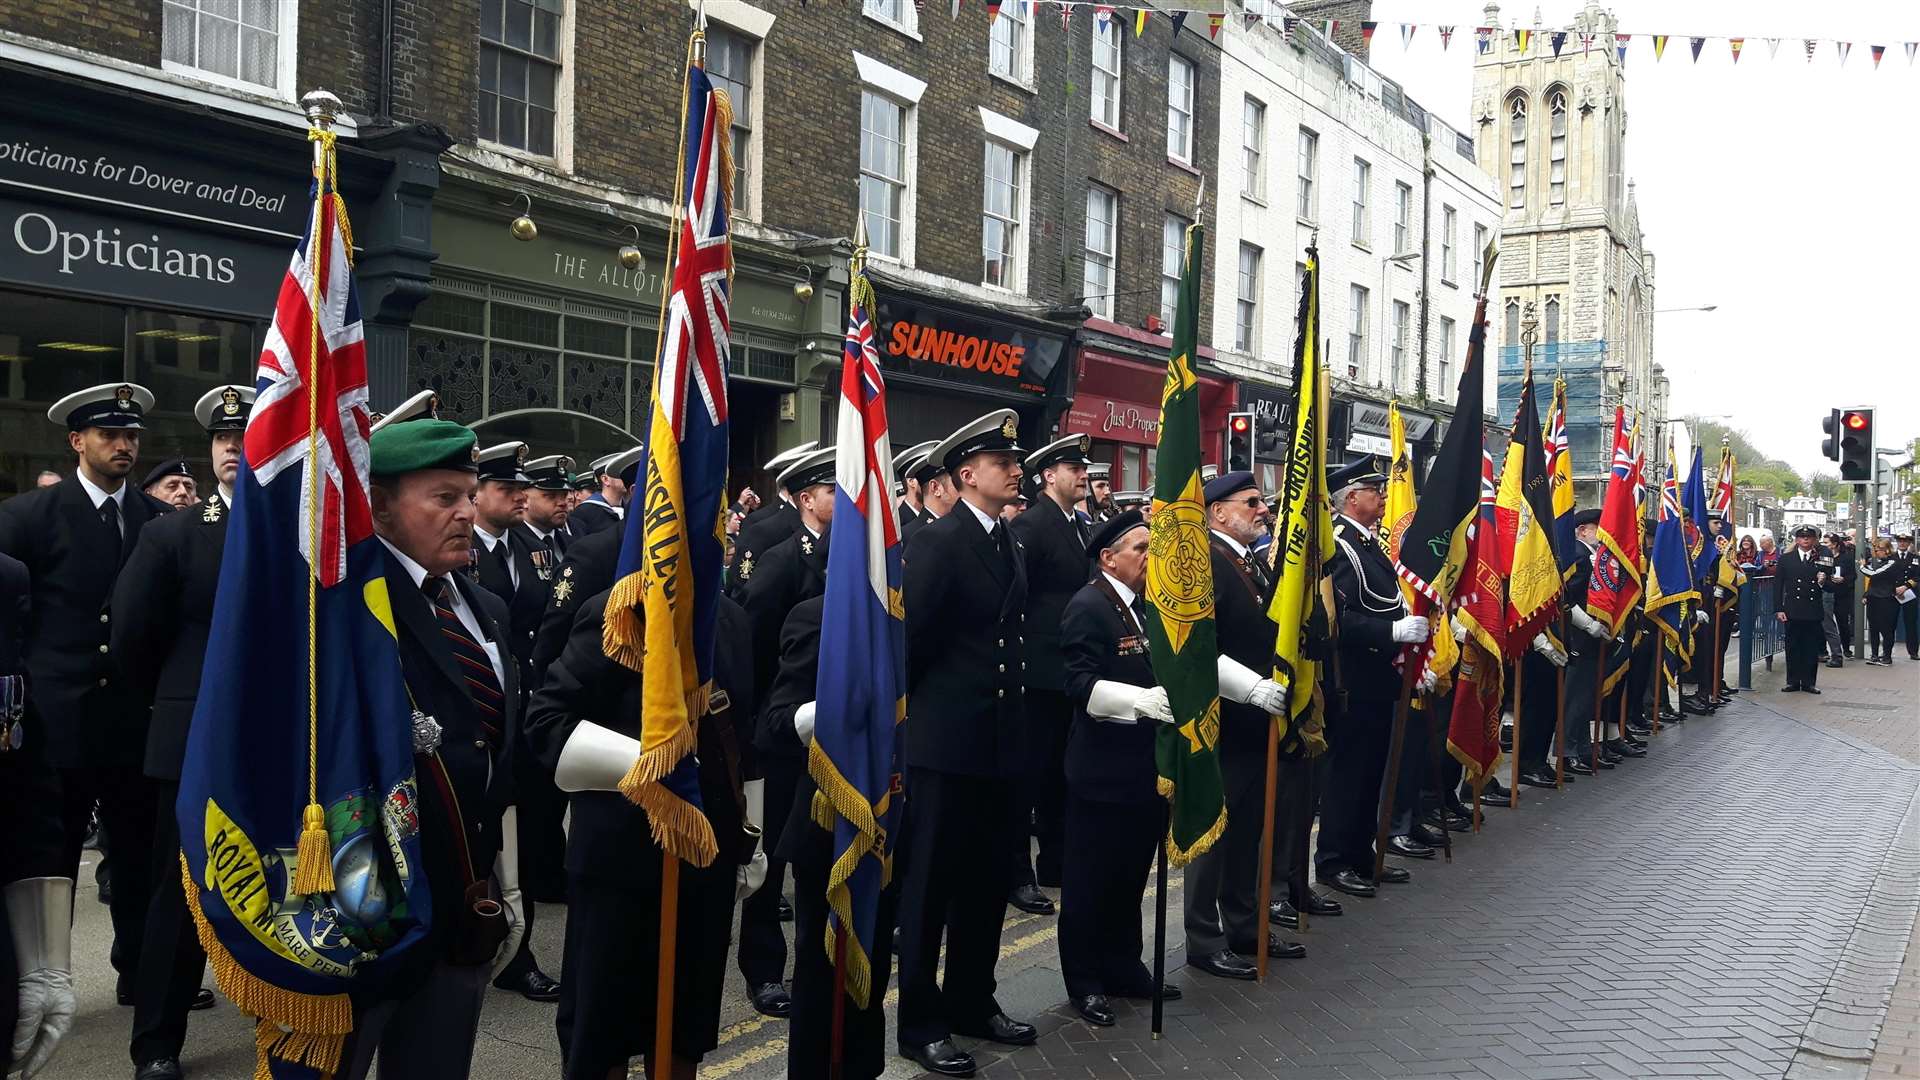 Standard bearers outside the town hall